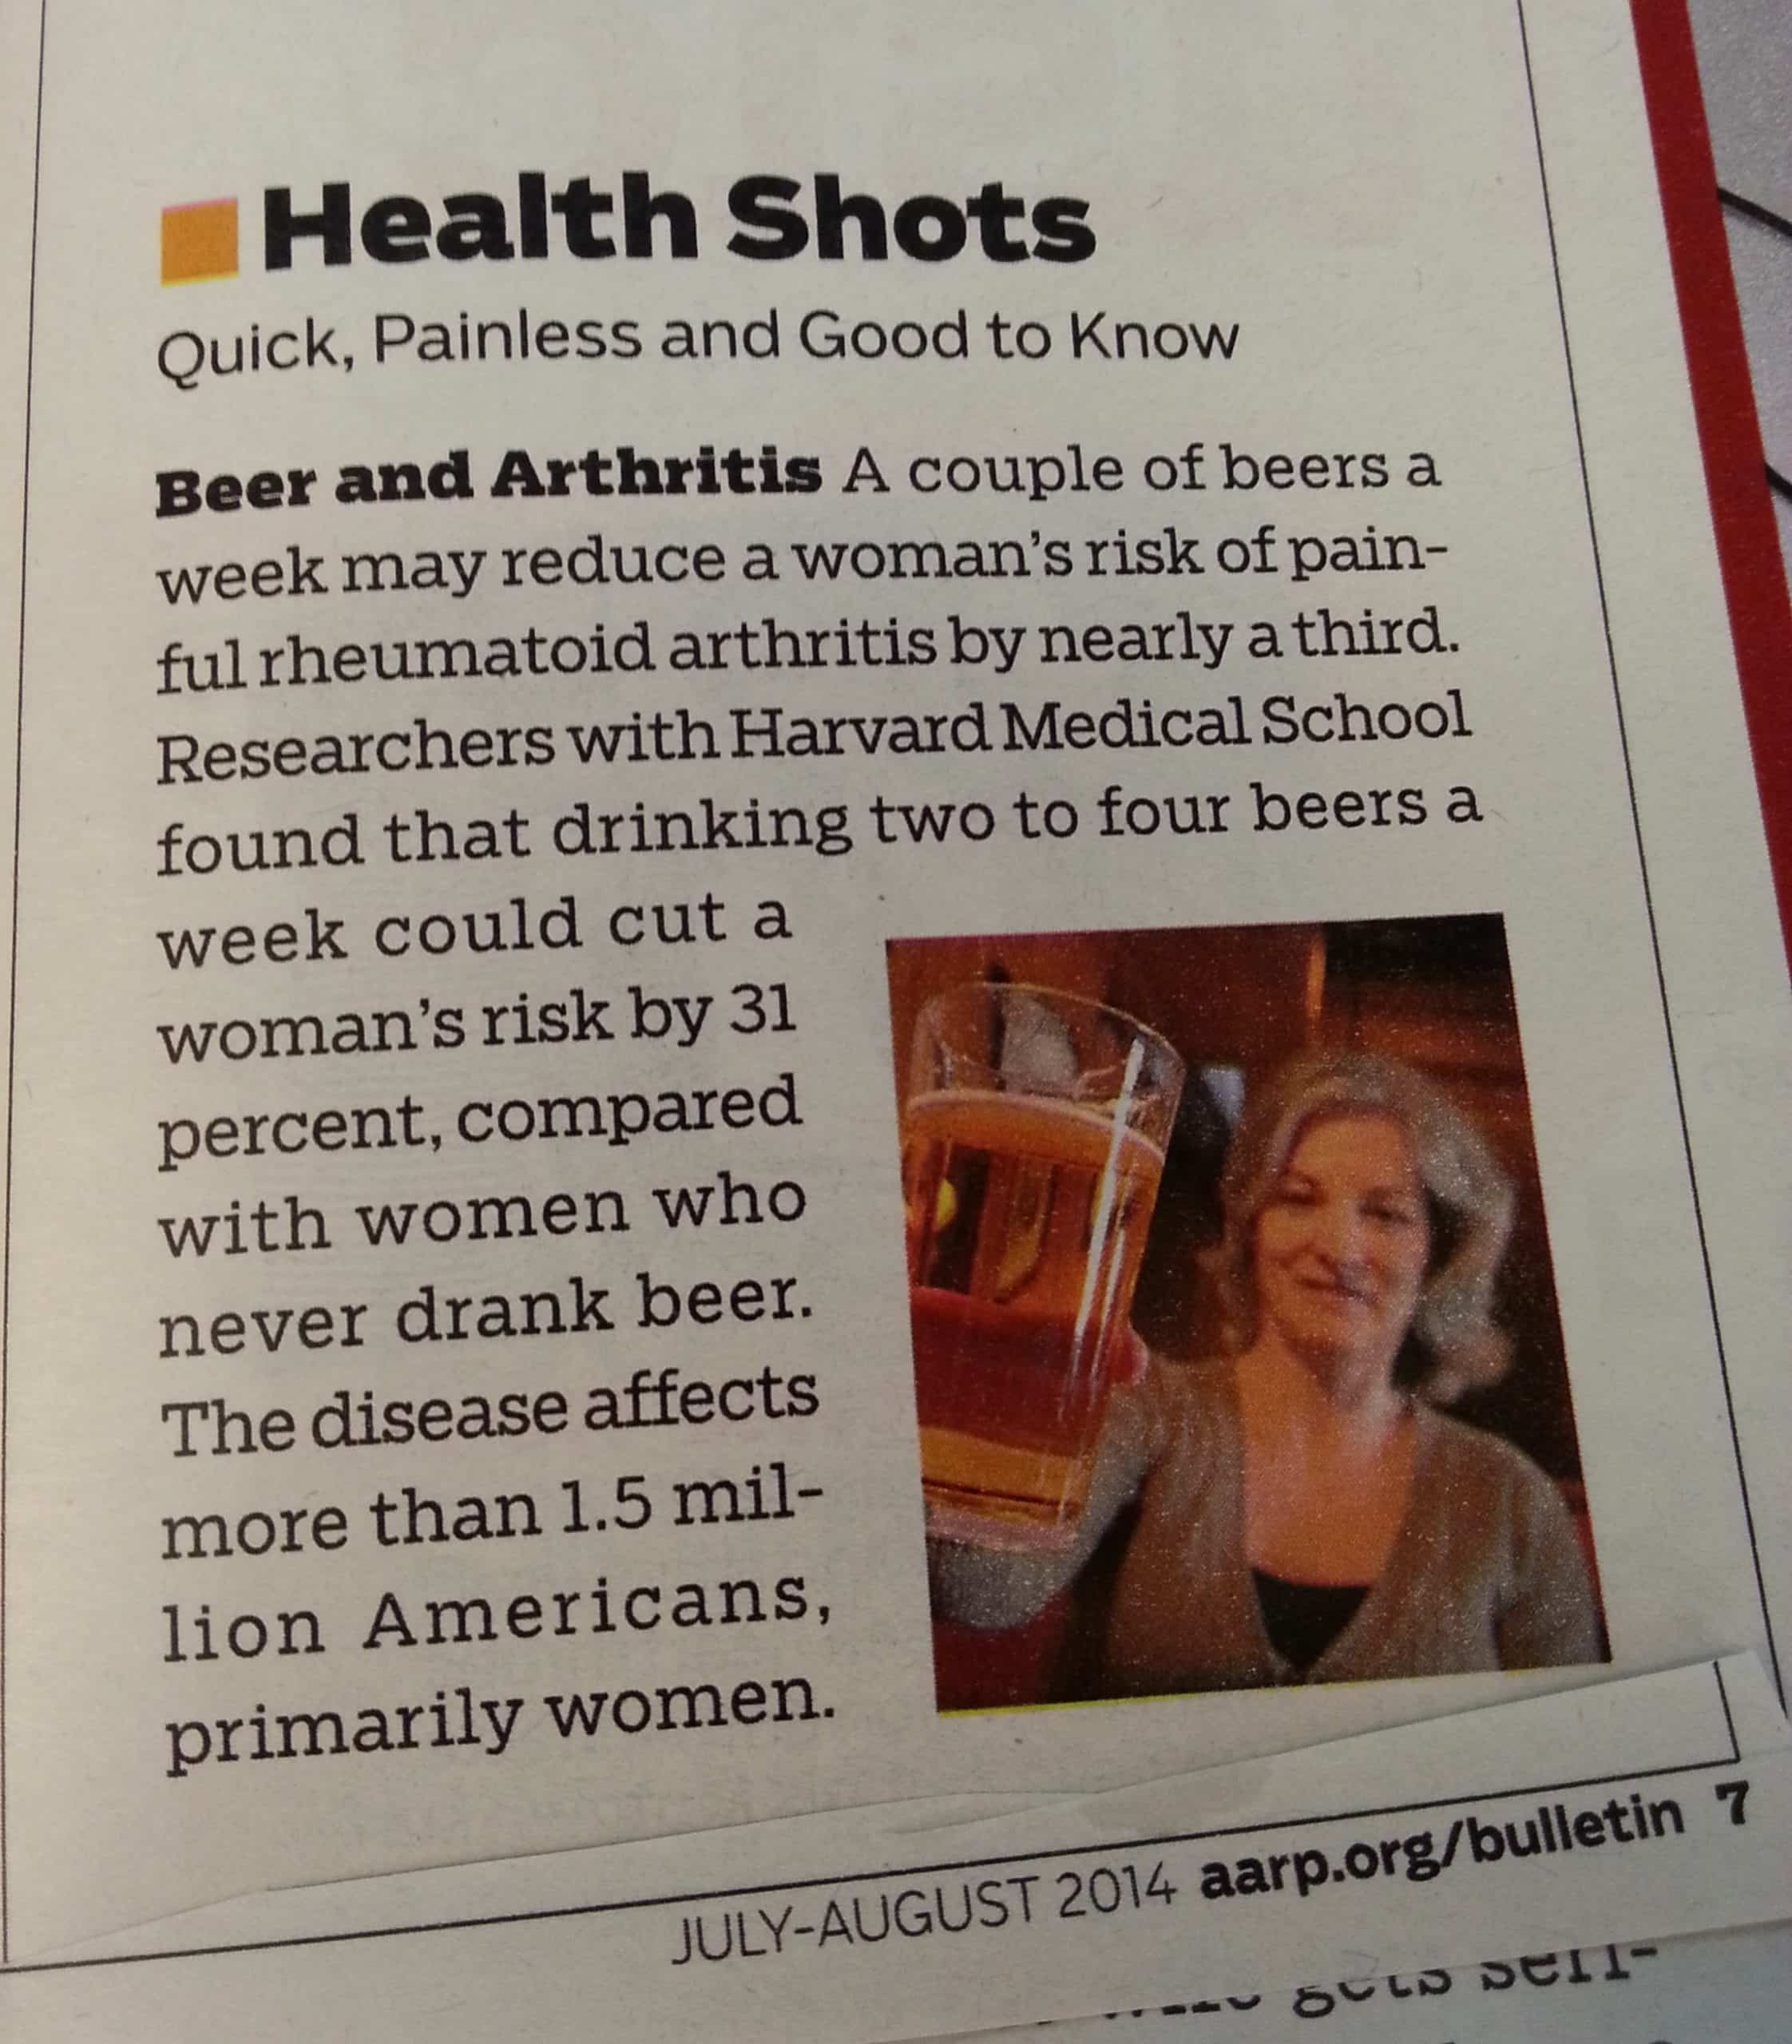 Beer Helps with Arthritis? Really?